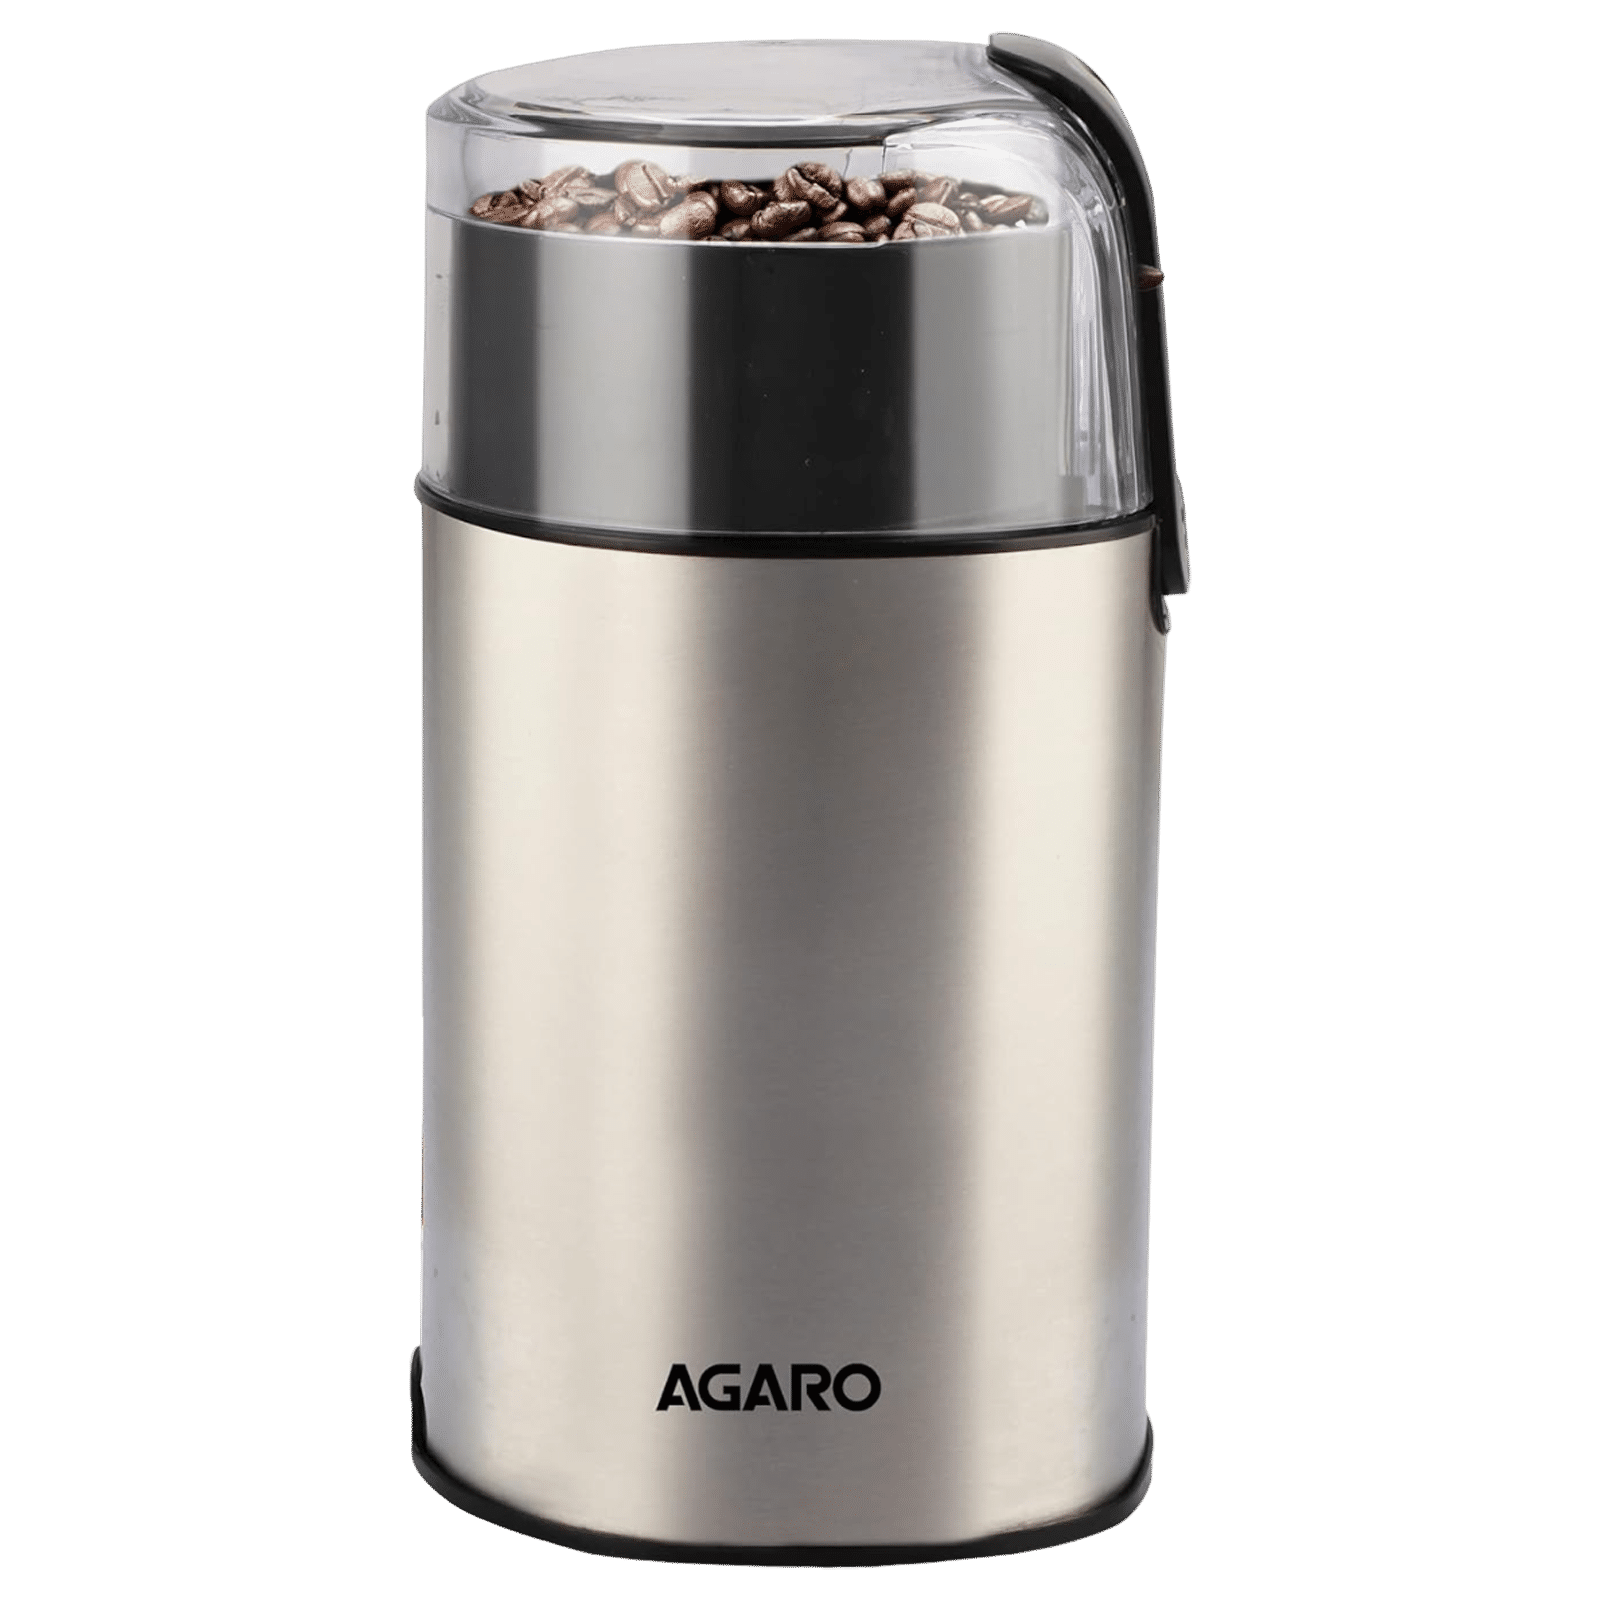 Buy AGARO Grand Fully Automatic Coffee Grinder (Grinds Coffee Beans, 33698, Silver) Online - Croma